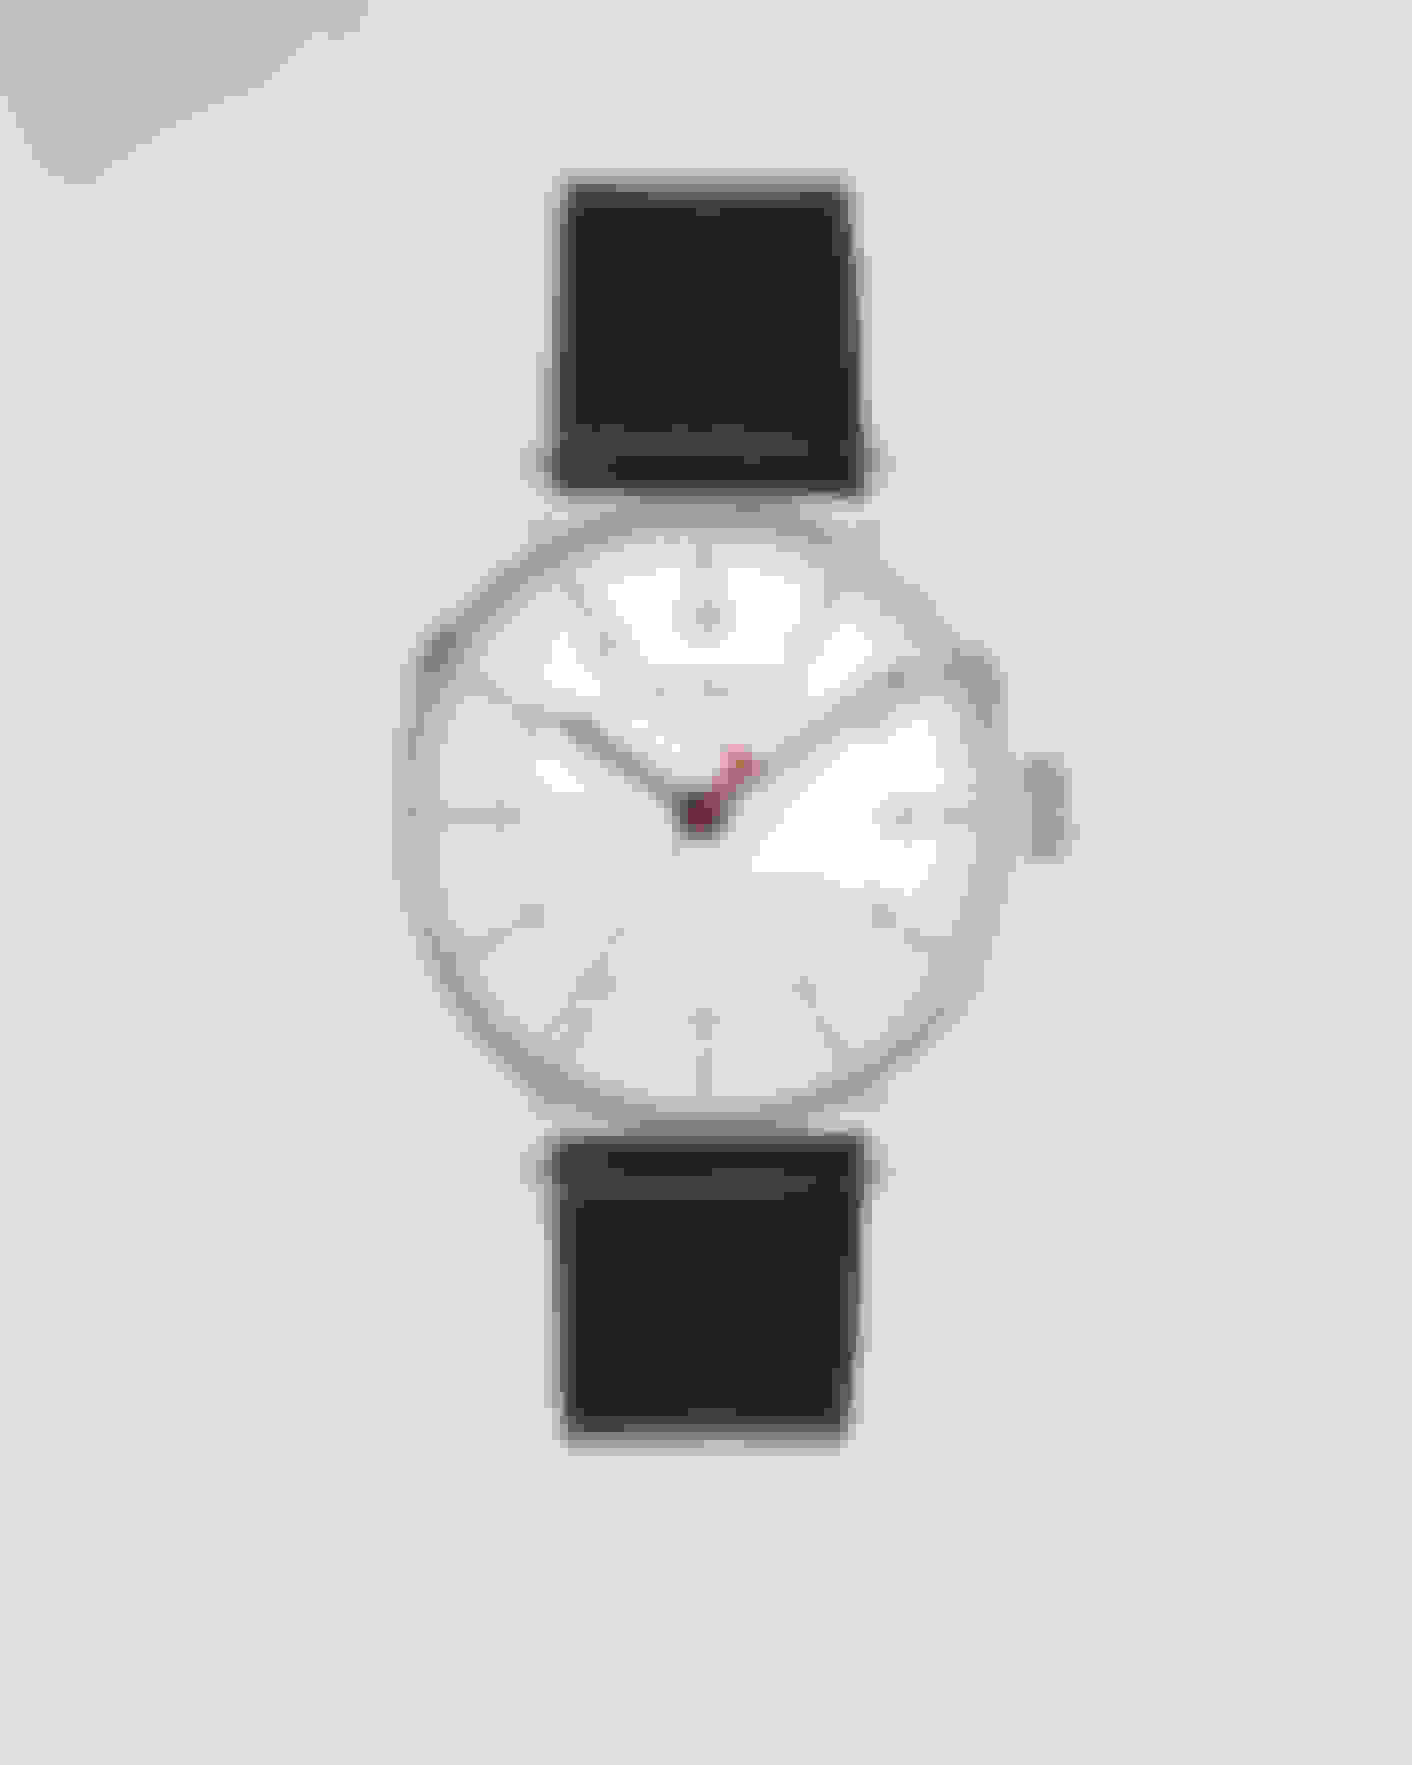 Black Leather Strap Watch Ted Baker